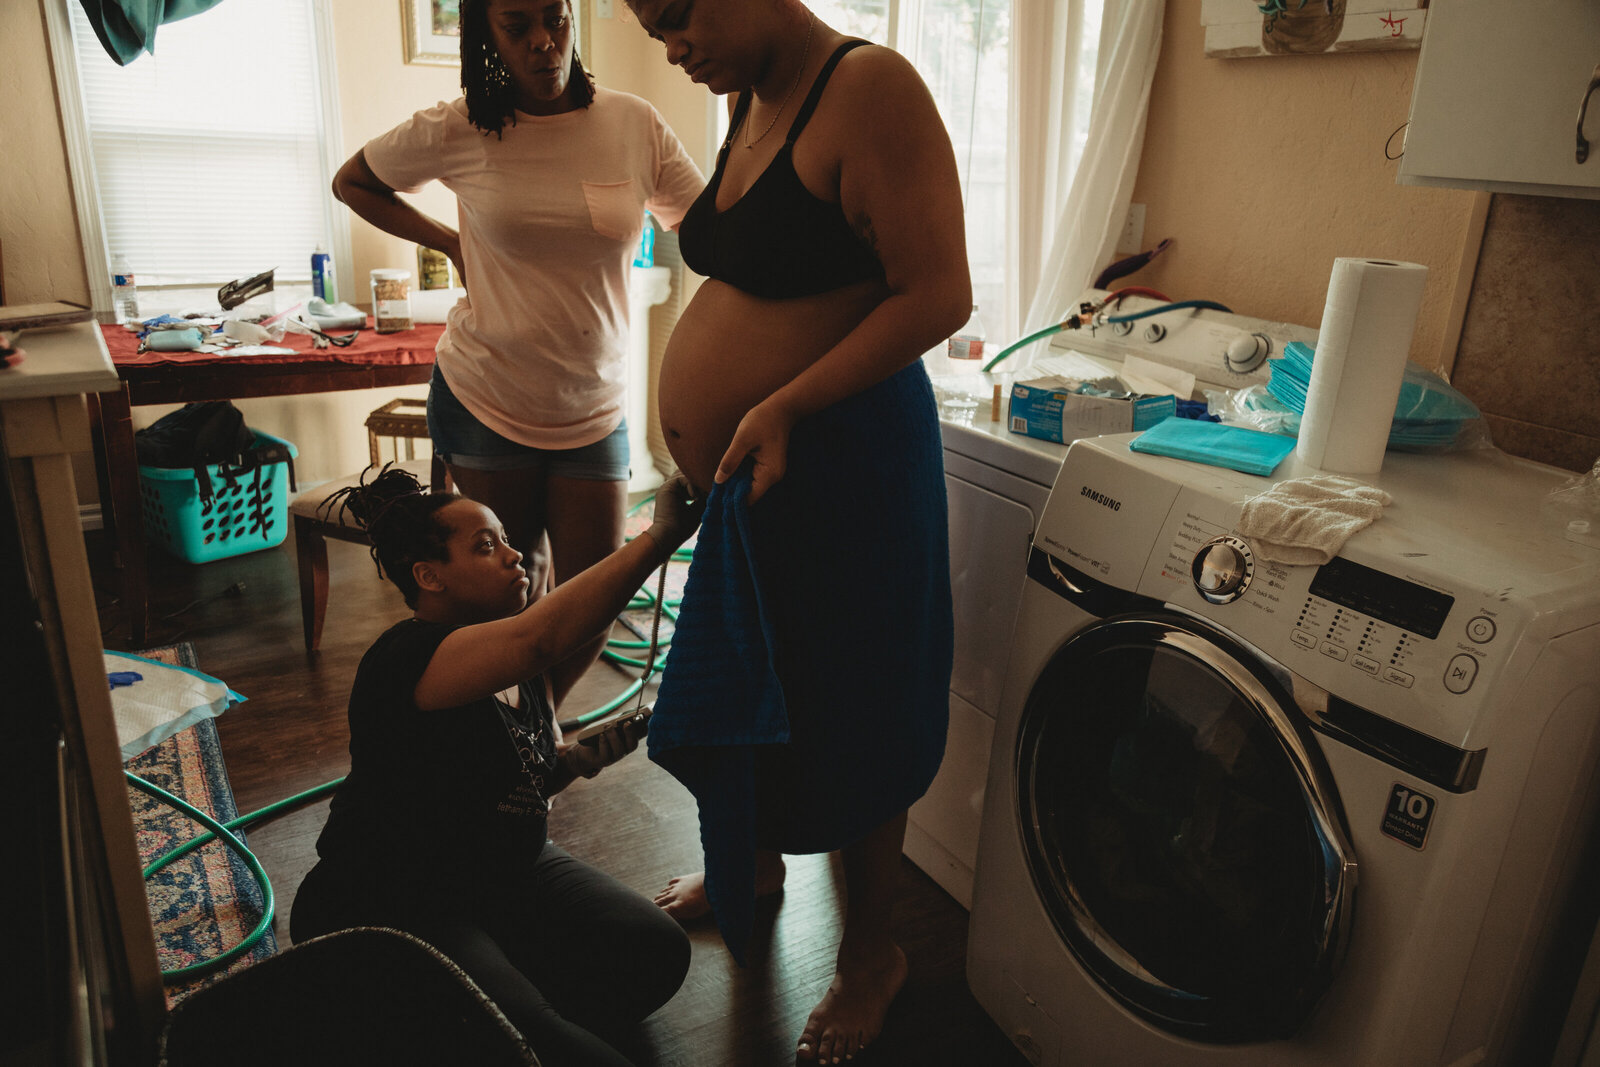 Midwifery care and home birth options for Middle, South Georgia families